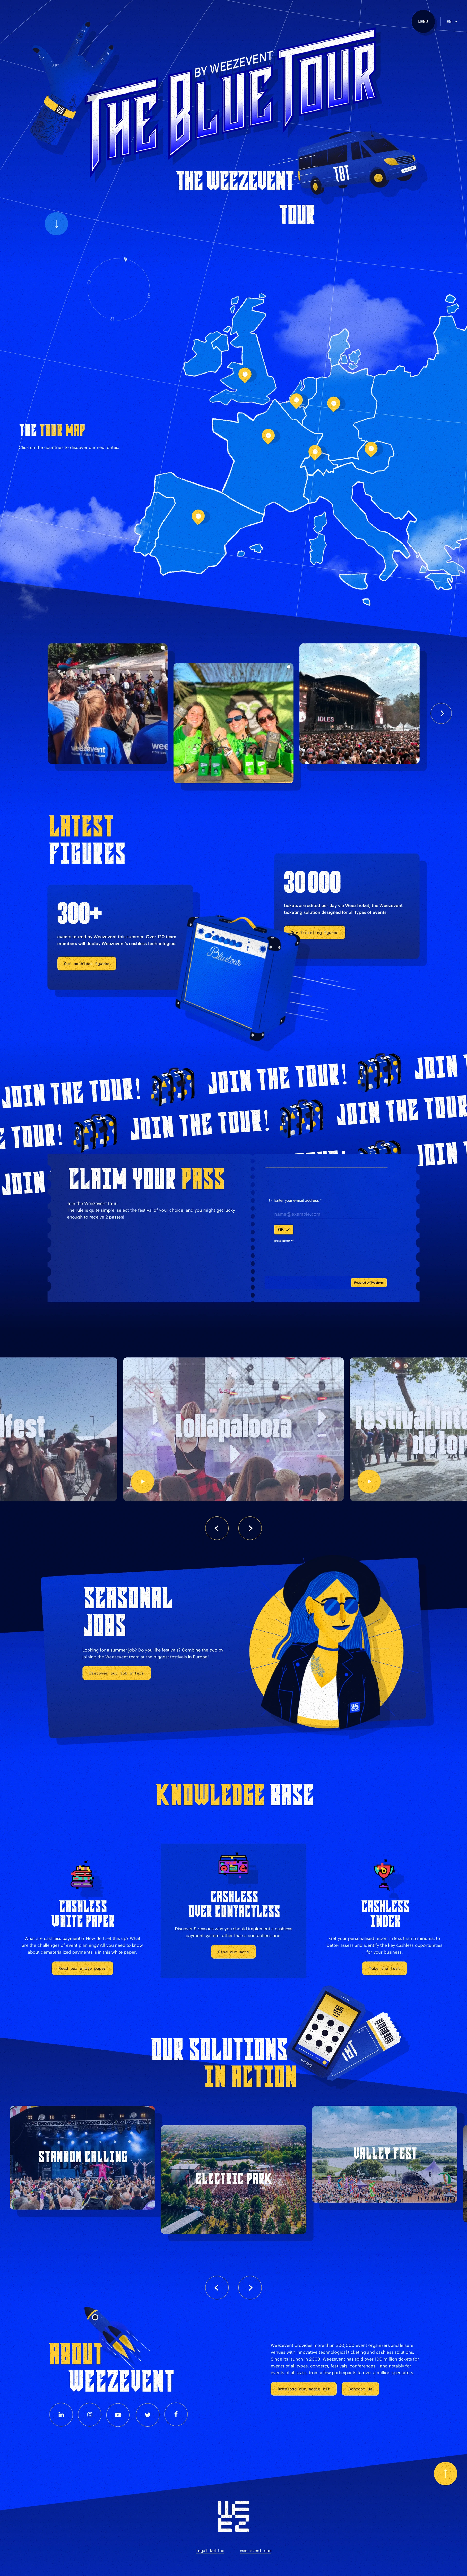 The Blue Tour Landing Page Example: Join The Blue Tour to follow the Weezevent crew on the most renowned festivals in Europe this summer.